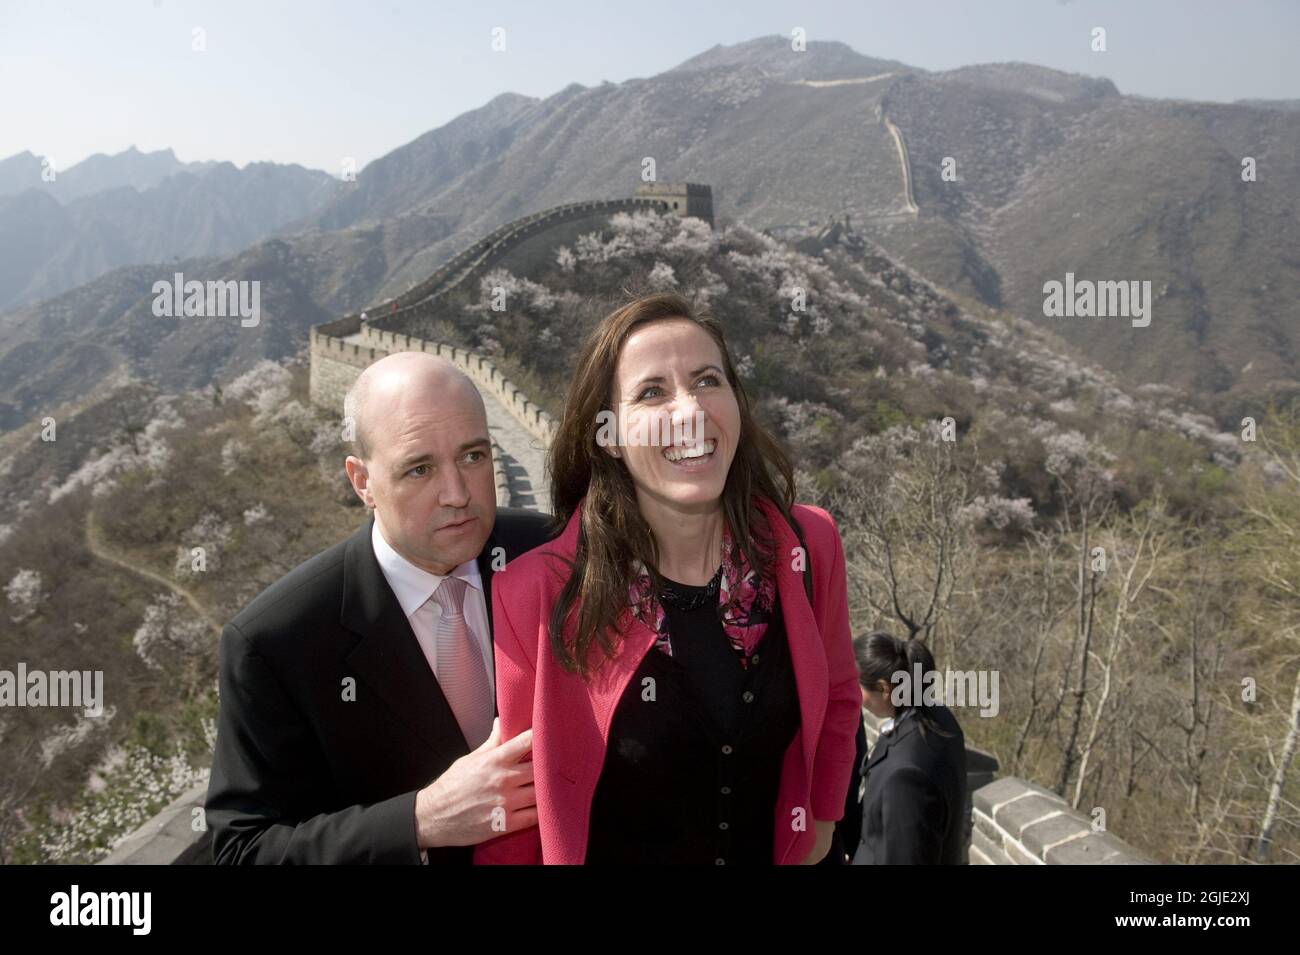 The Swedish Prime Minister Fredrik Reinfeldt and his wife Filippa during a visit to the Great Wall of China Stock Photo